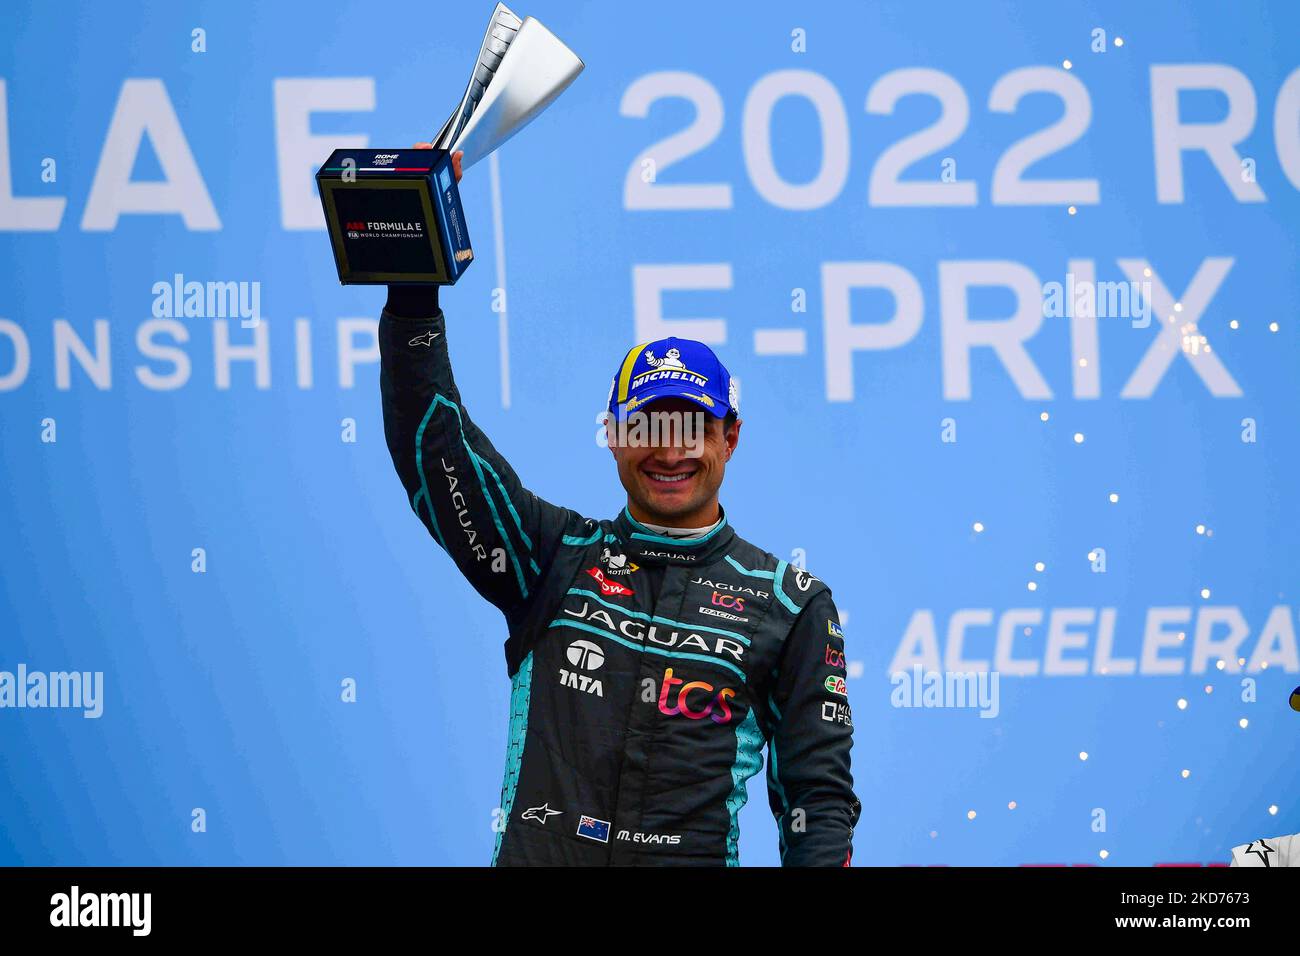 Mitch Evans of Jaguar tcs Racing on podium during celebration of Rome E-Prix, 4th round of Formula E World Championship in city circuit of Rome, EUR neighborhood Rome, 9 April 2022 (Photo by Andrea Diodato/NurPhoto) Stock Photo